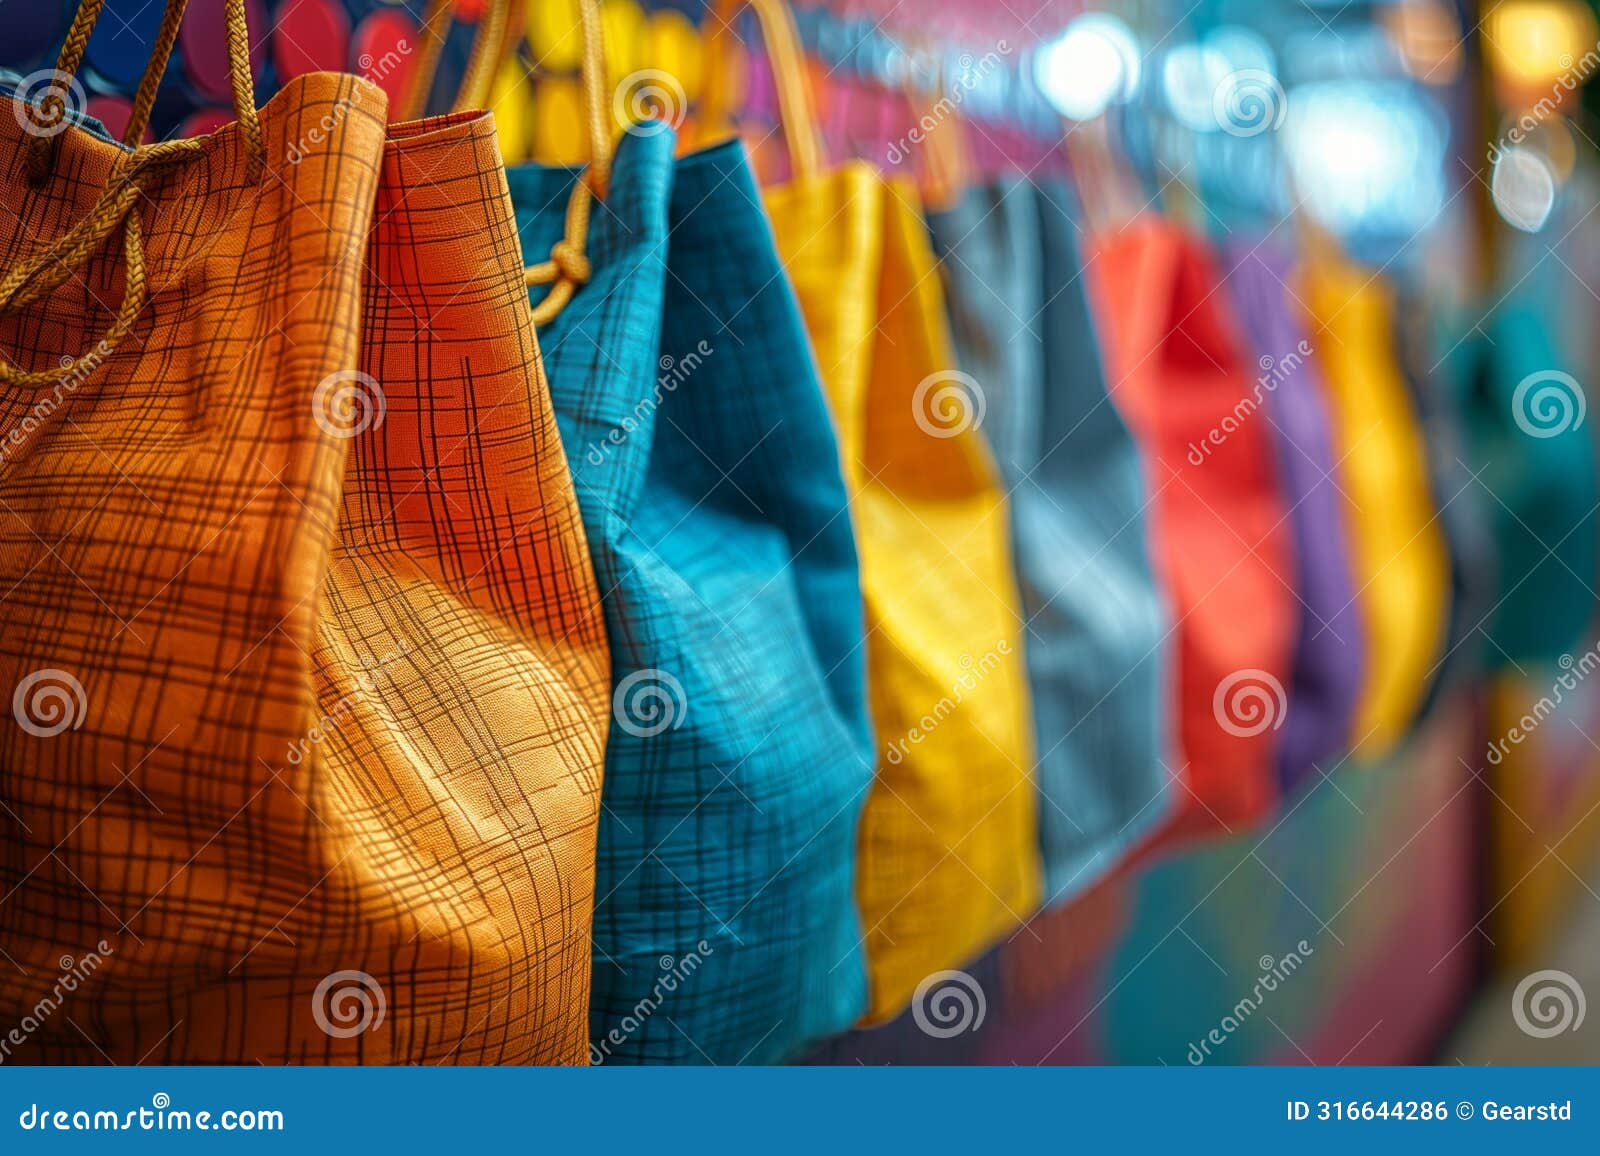 close-up of textural colorful shopping bags